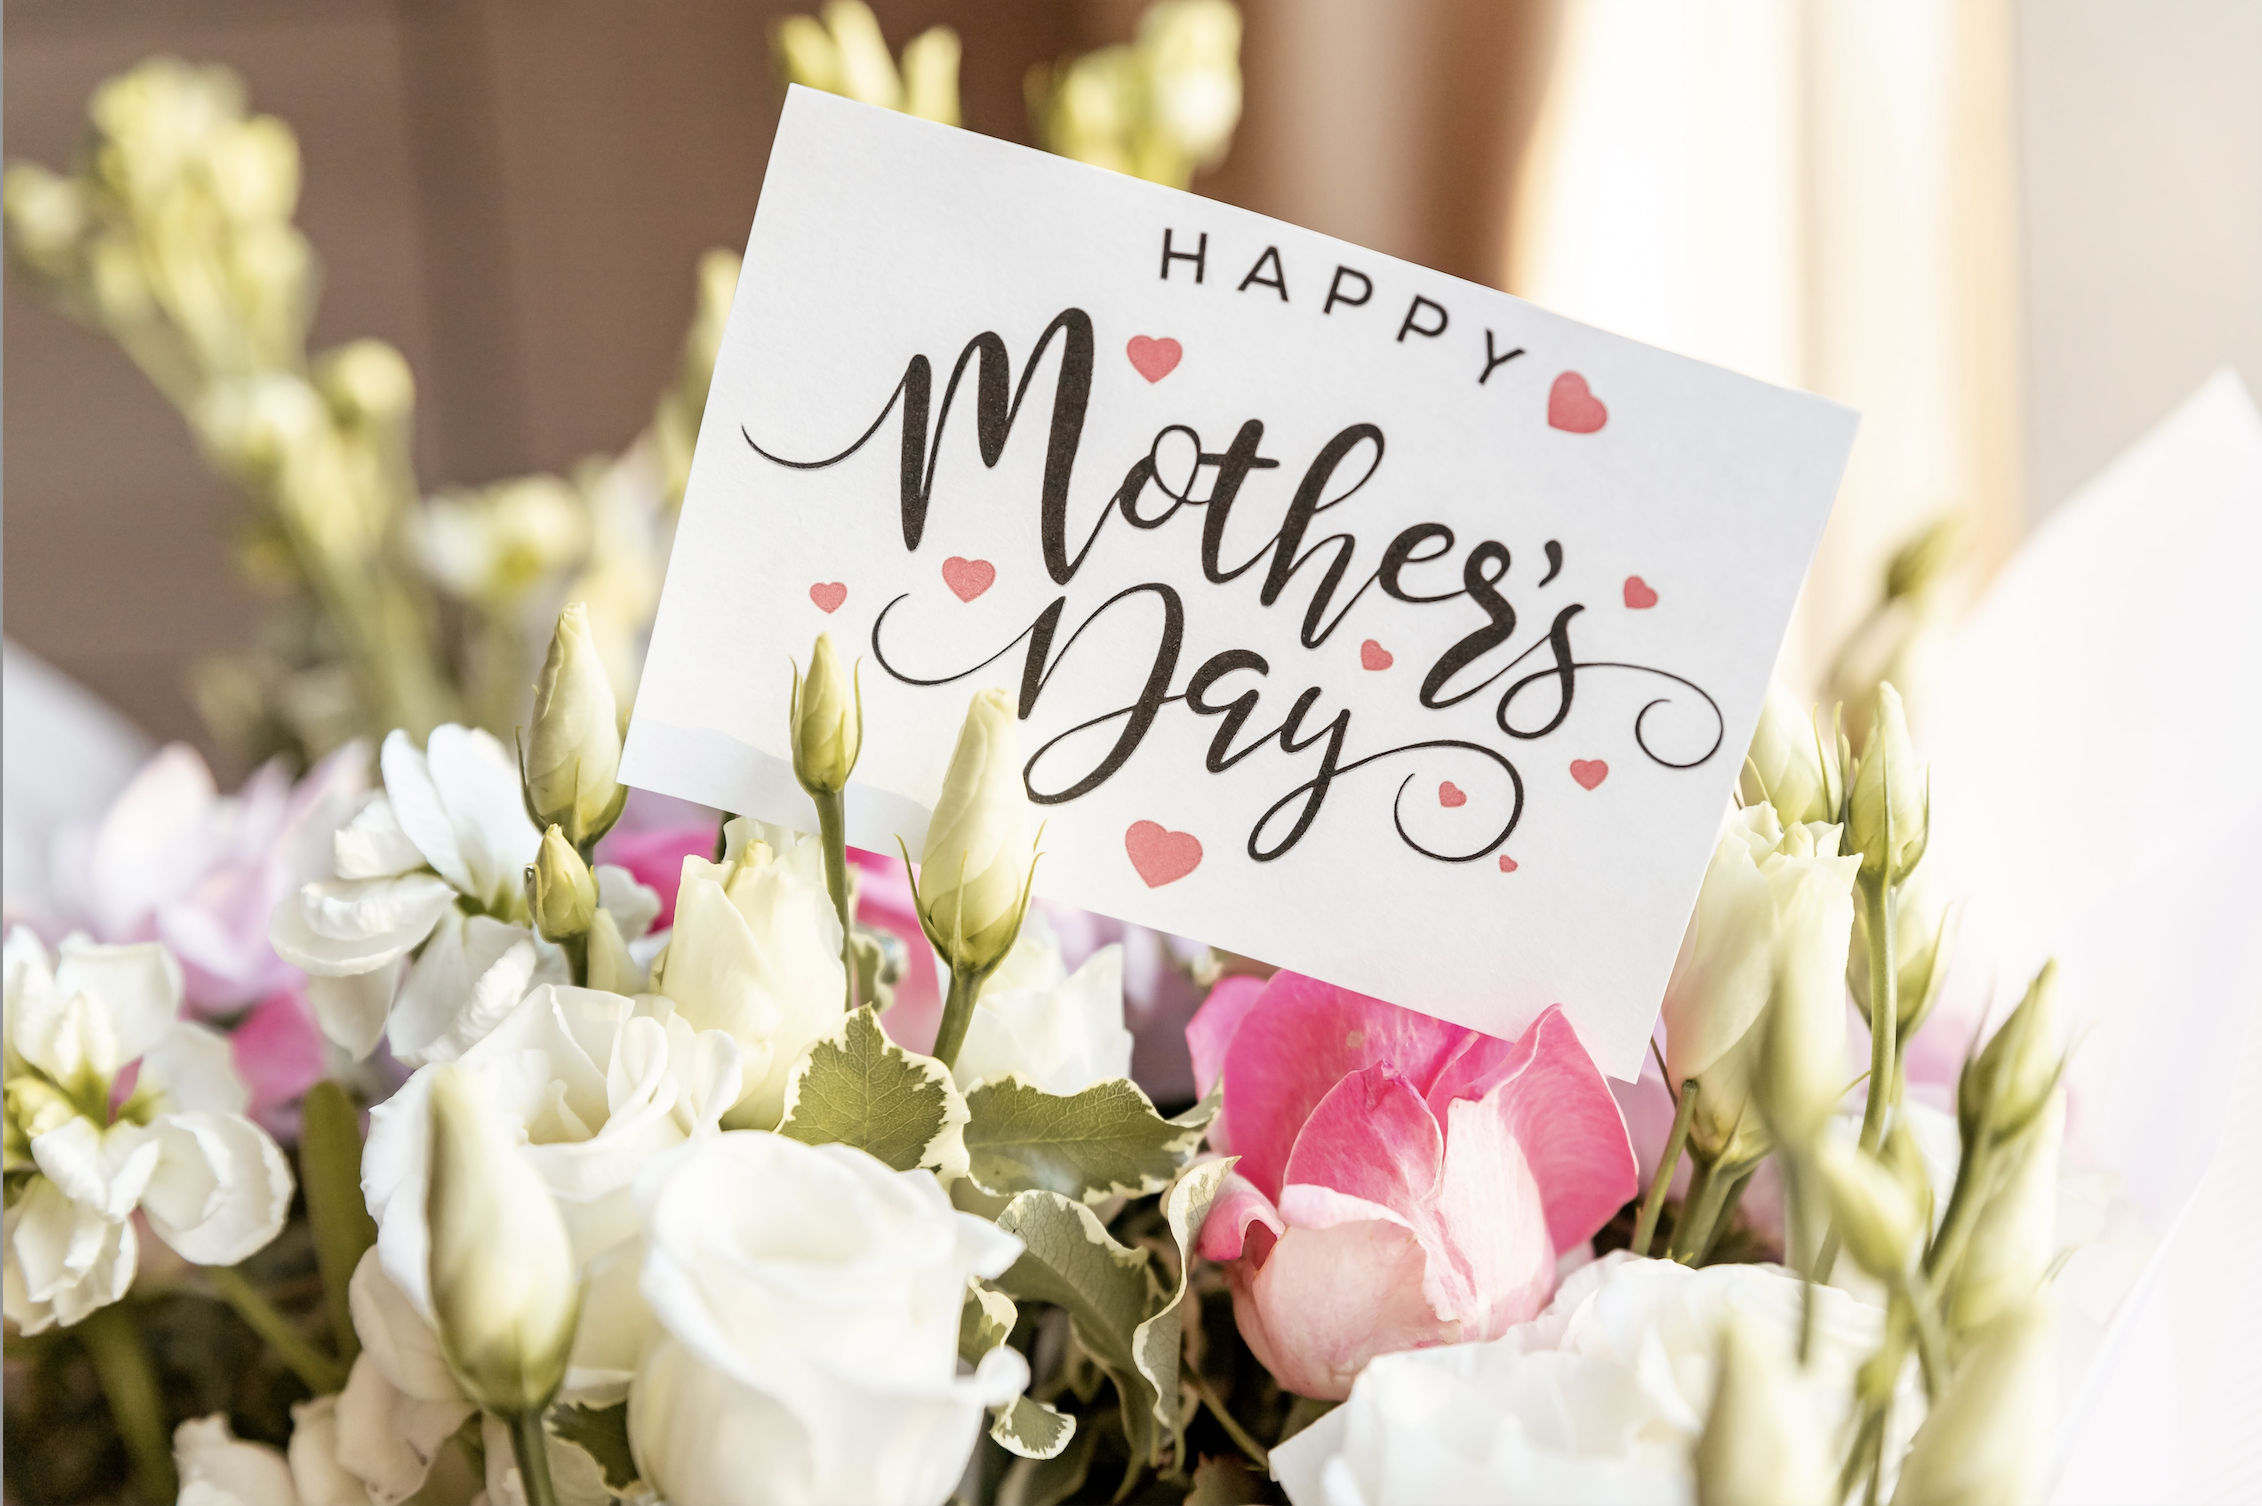 HAPPY MOTHER’S DAY: Special Day That Celebrates Mothers’ Special Bond Has Been Officially Observed Since 1908